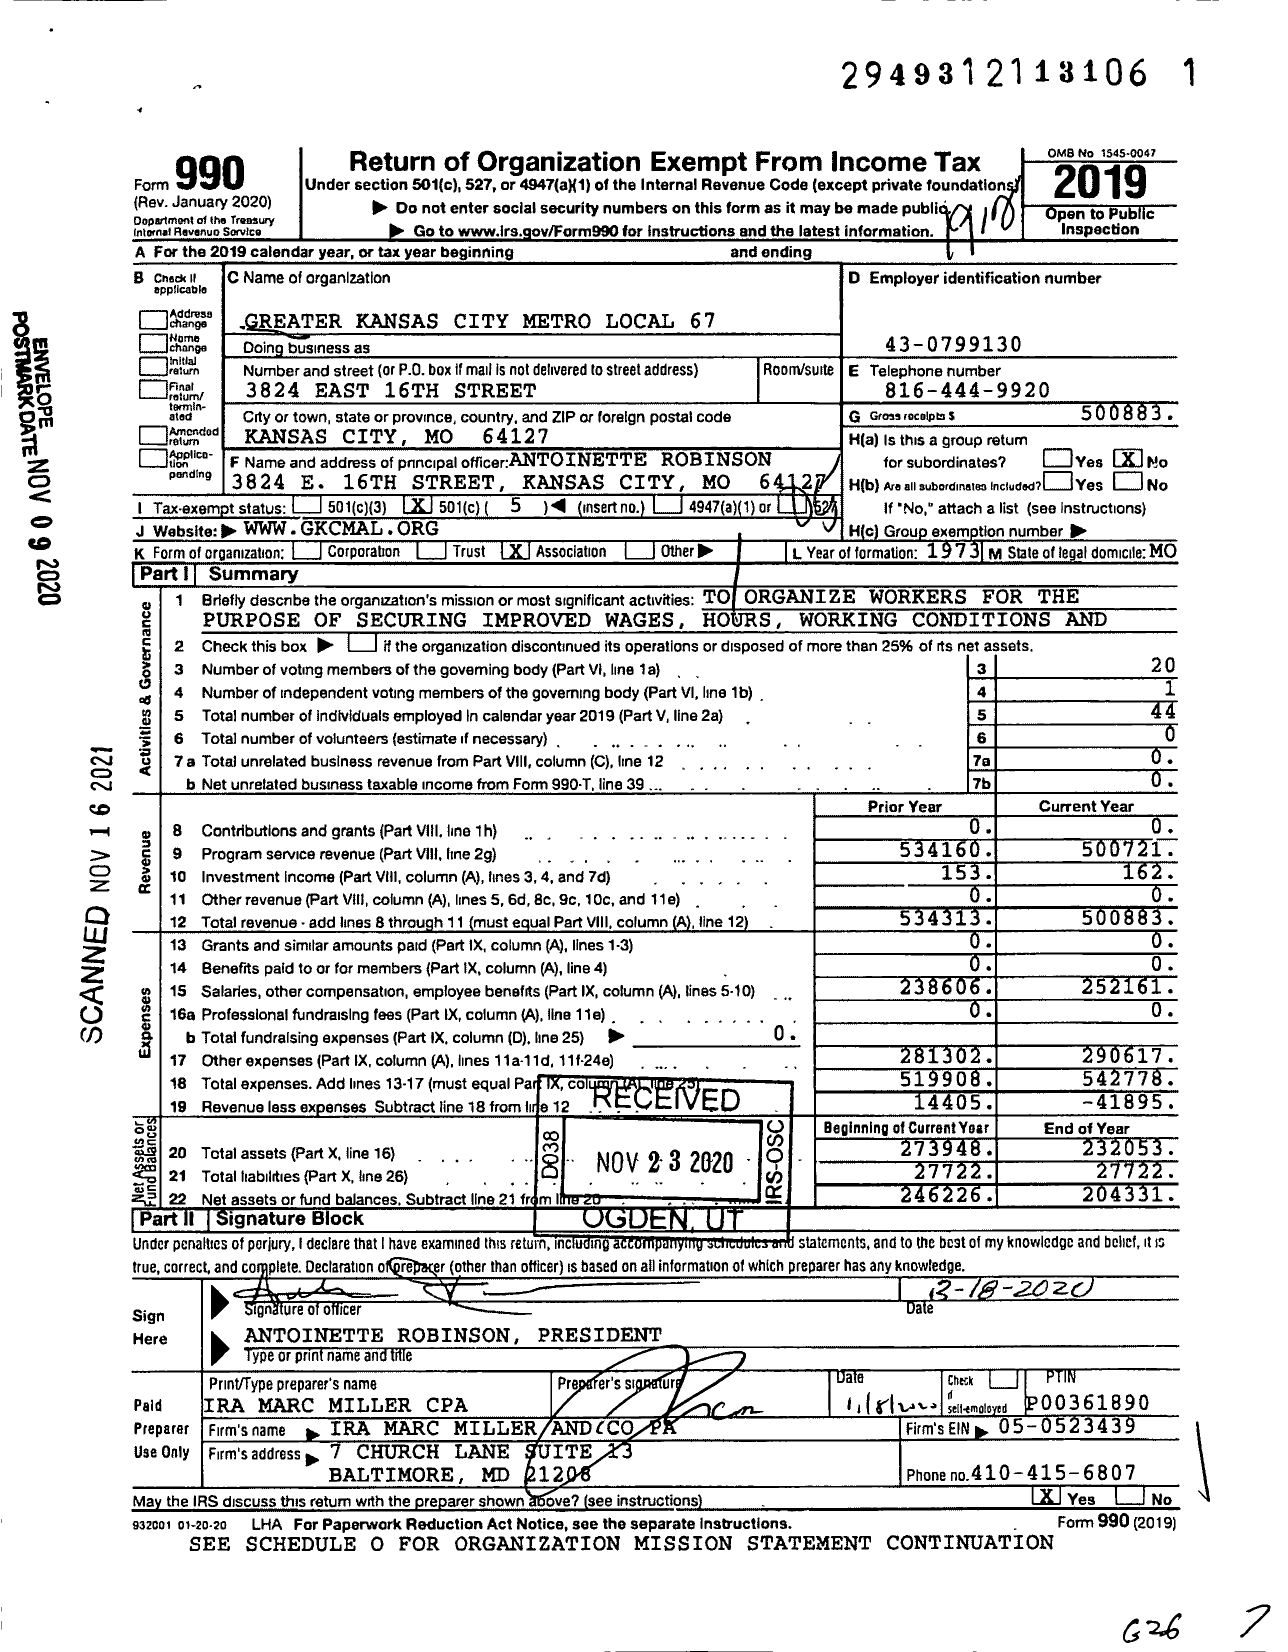 Image of first page of 2019 Form 990O for AMERICAN POSTAL WORKERS UNION - 67 Greater K C Metro Area Local